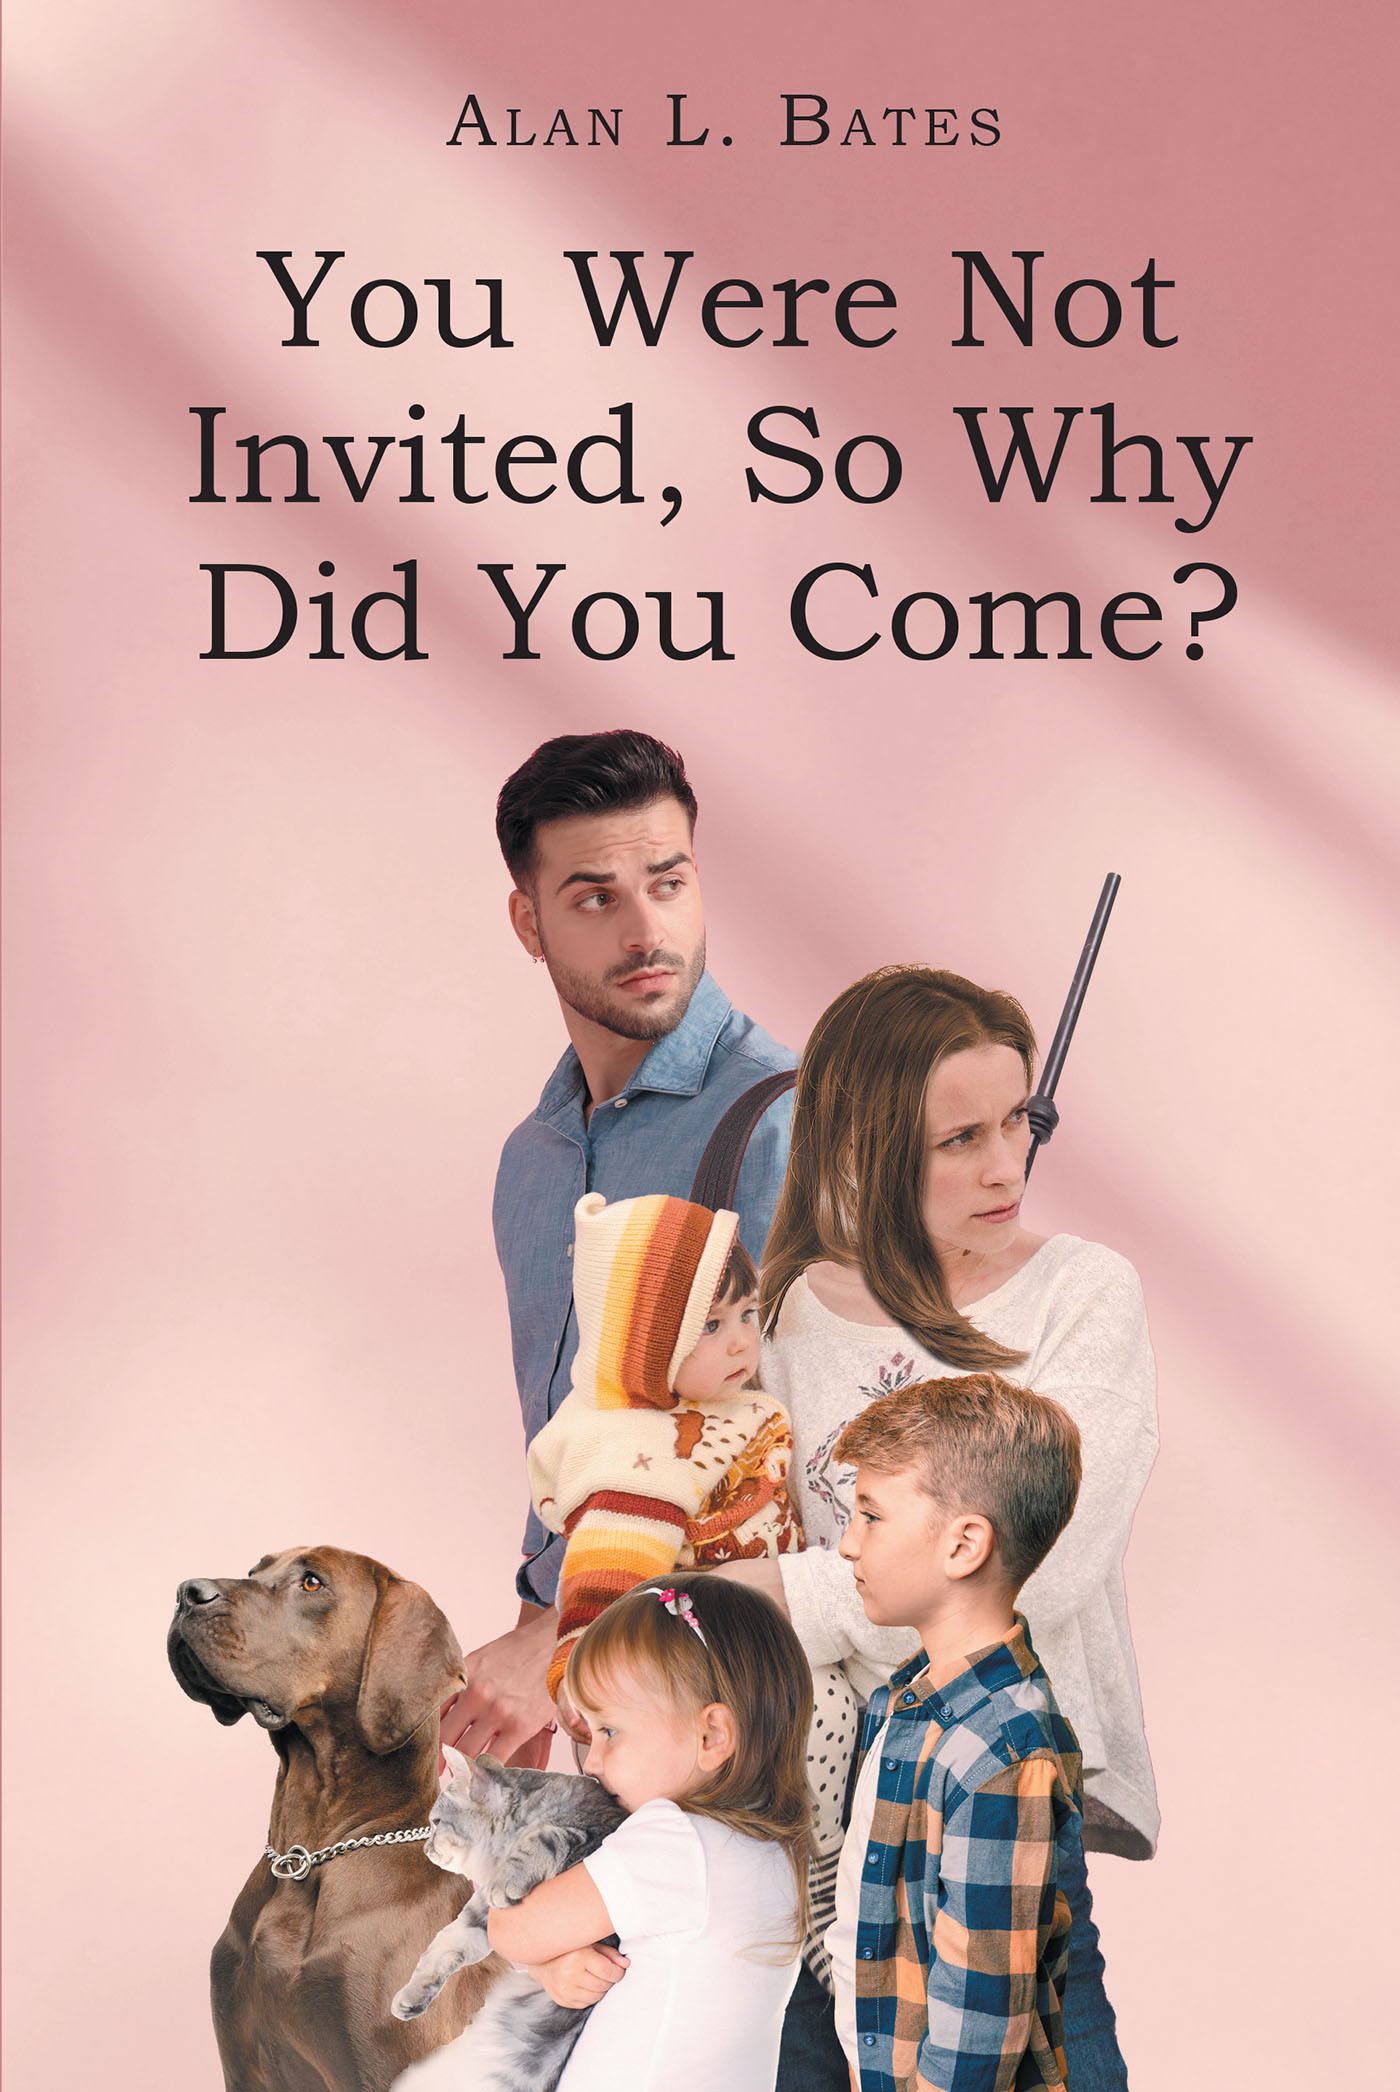 Author Alan L. Bates’s New Book, “You Were Not Invited, So Why Did You Come?” is a Heart-Wrenching Story of Love and Death at the End of the World